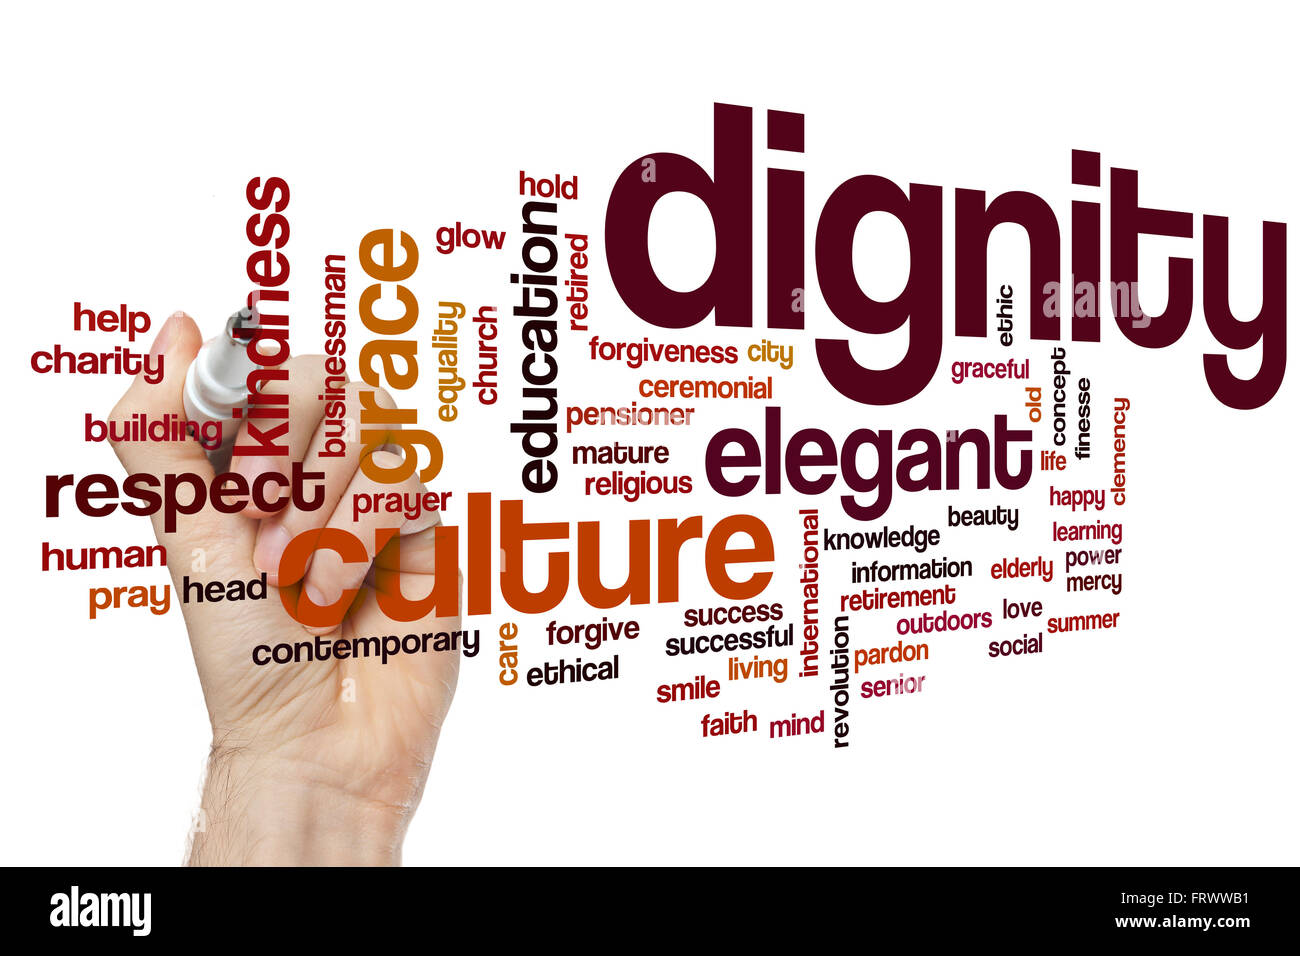 Dignity word cloud Stock Photo